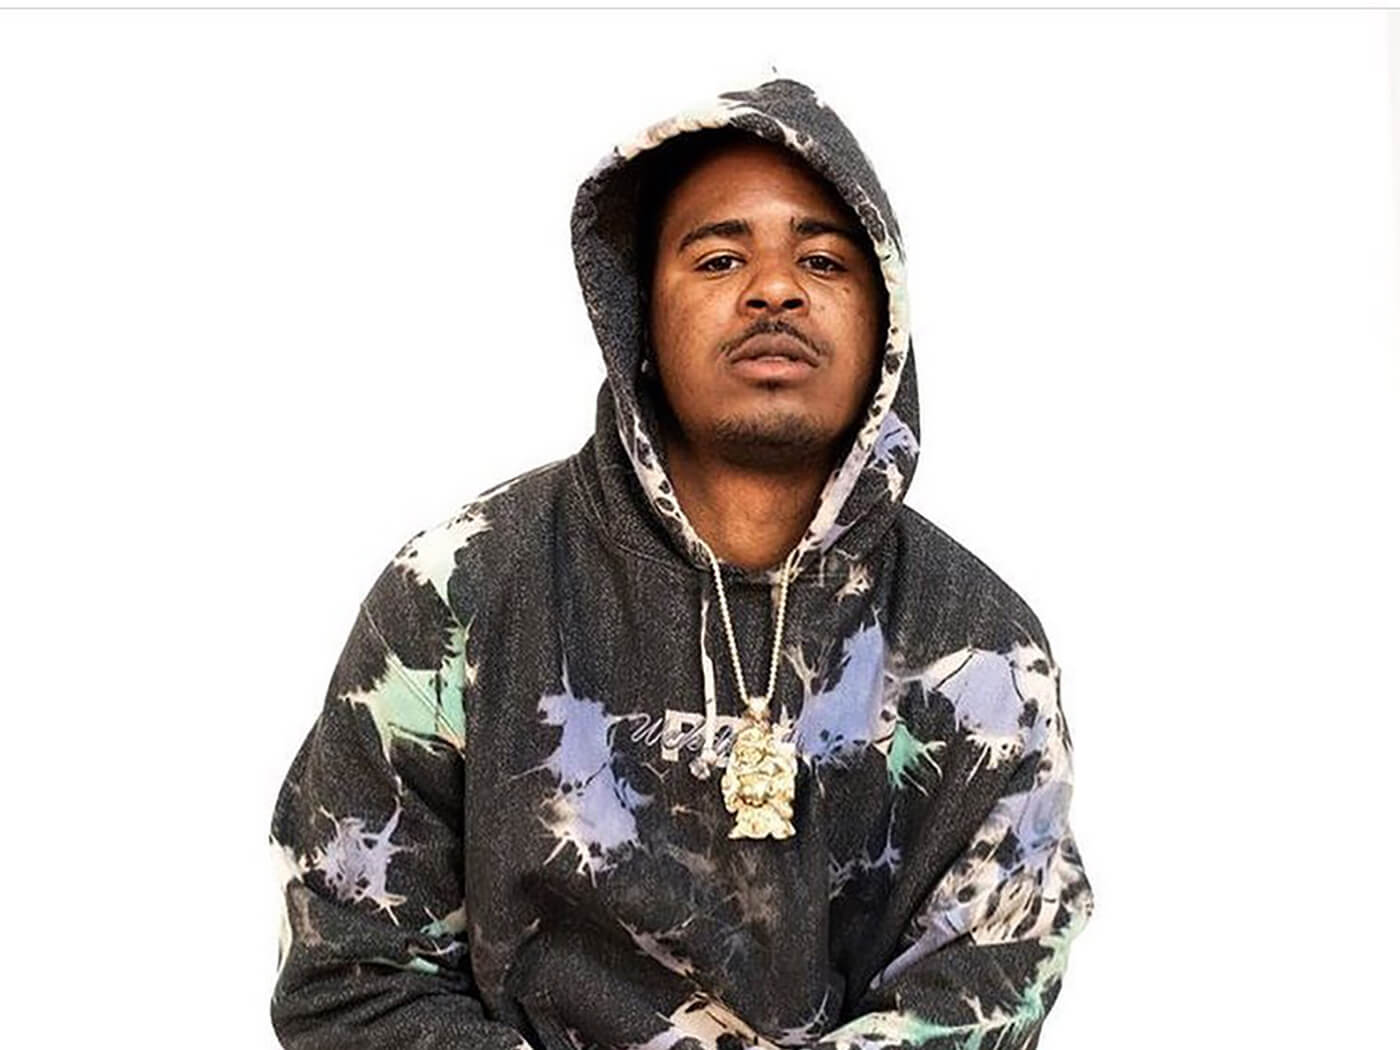 Drakeo the Ruler releases new mixtape, 'Thank You for Using GTL'